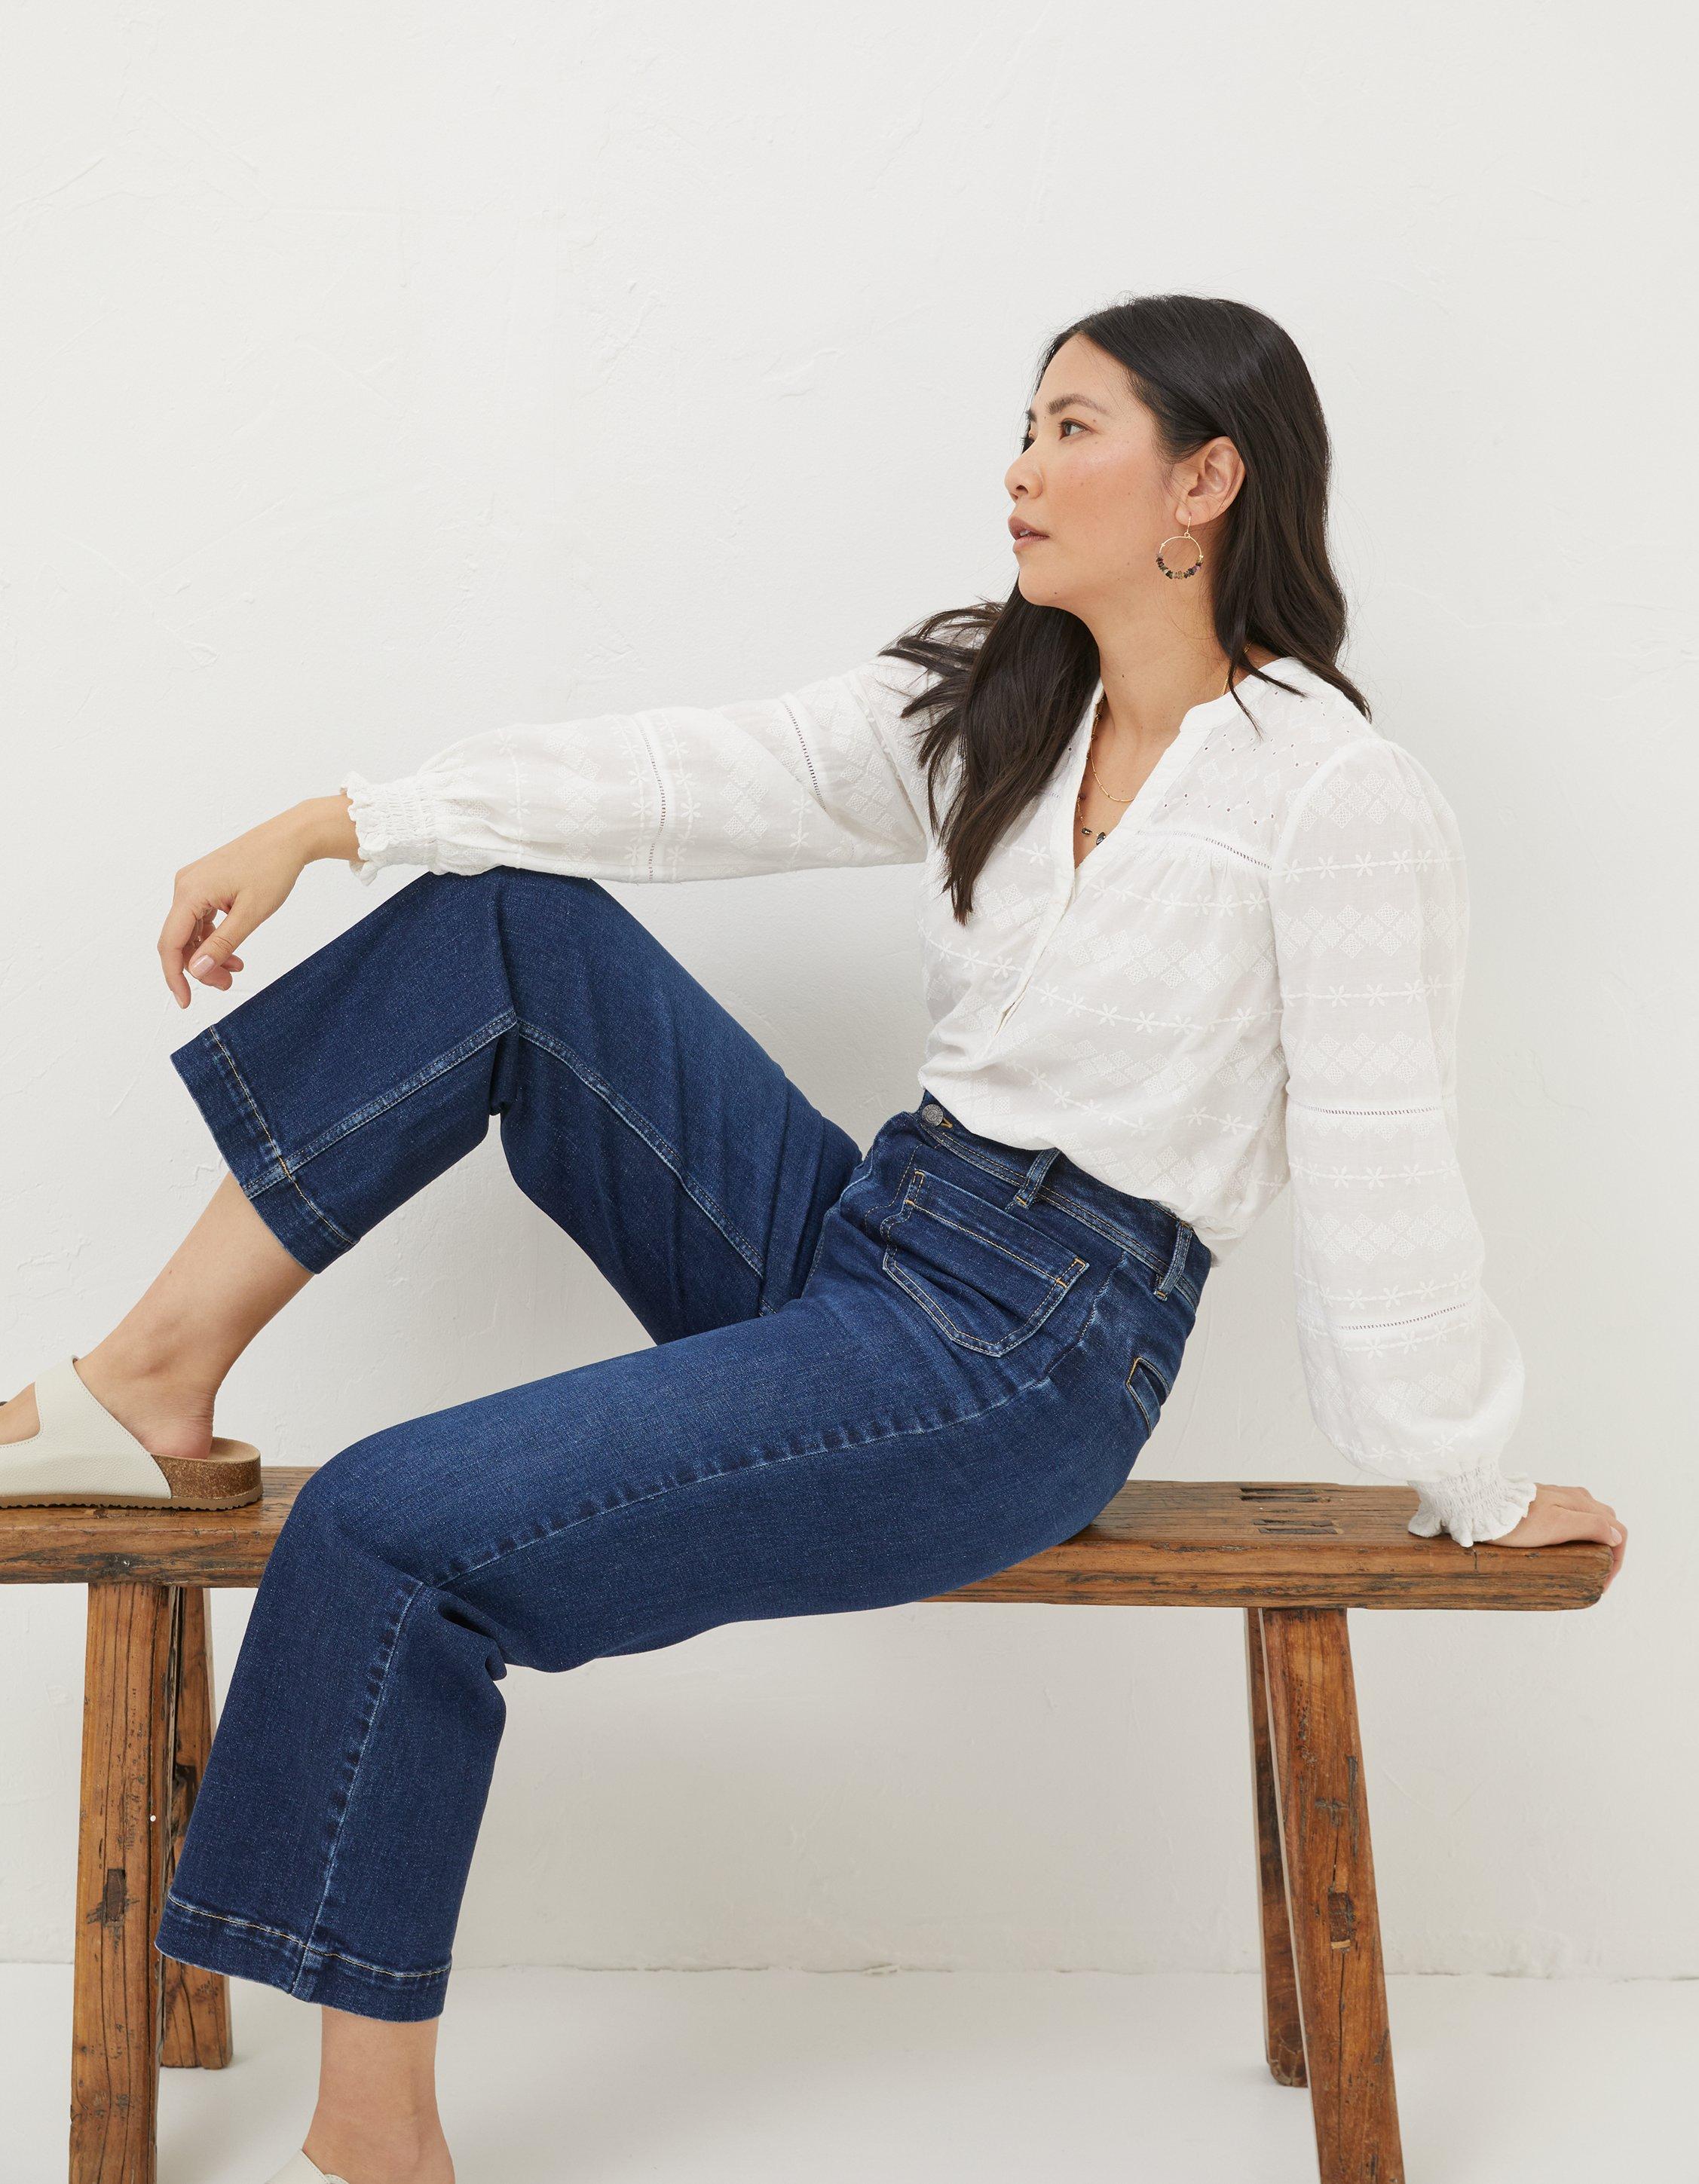 Keswick Wide Leg Jeans, Jeans & Dungarees